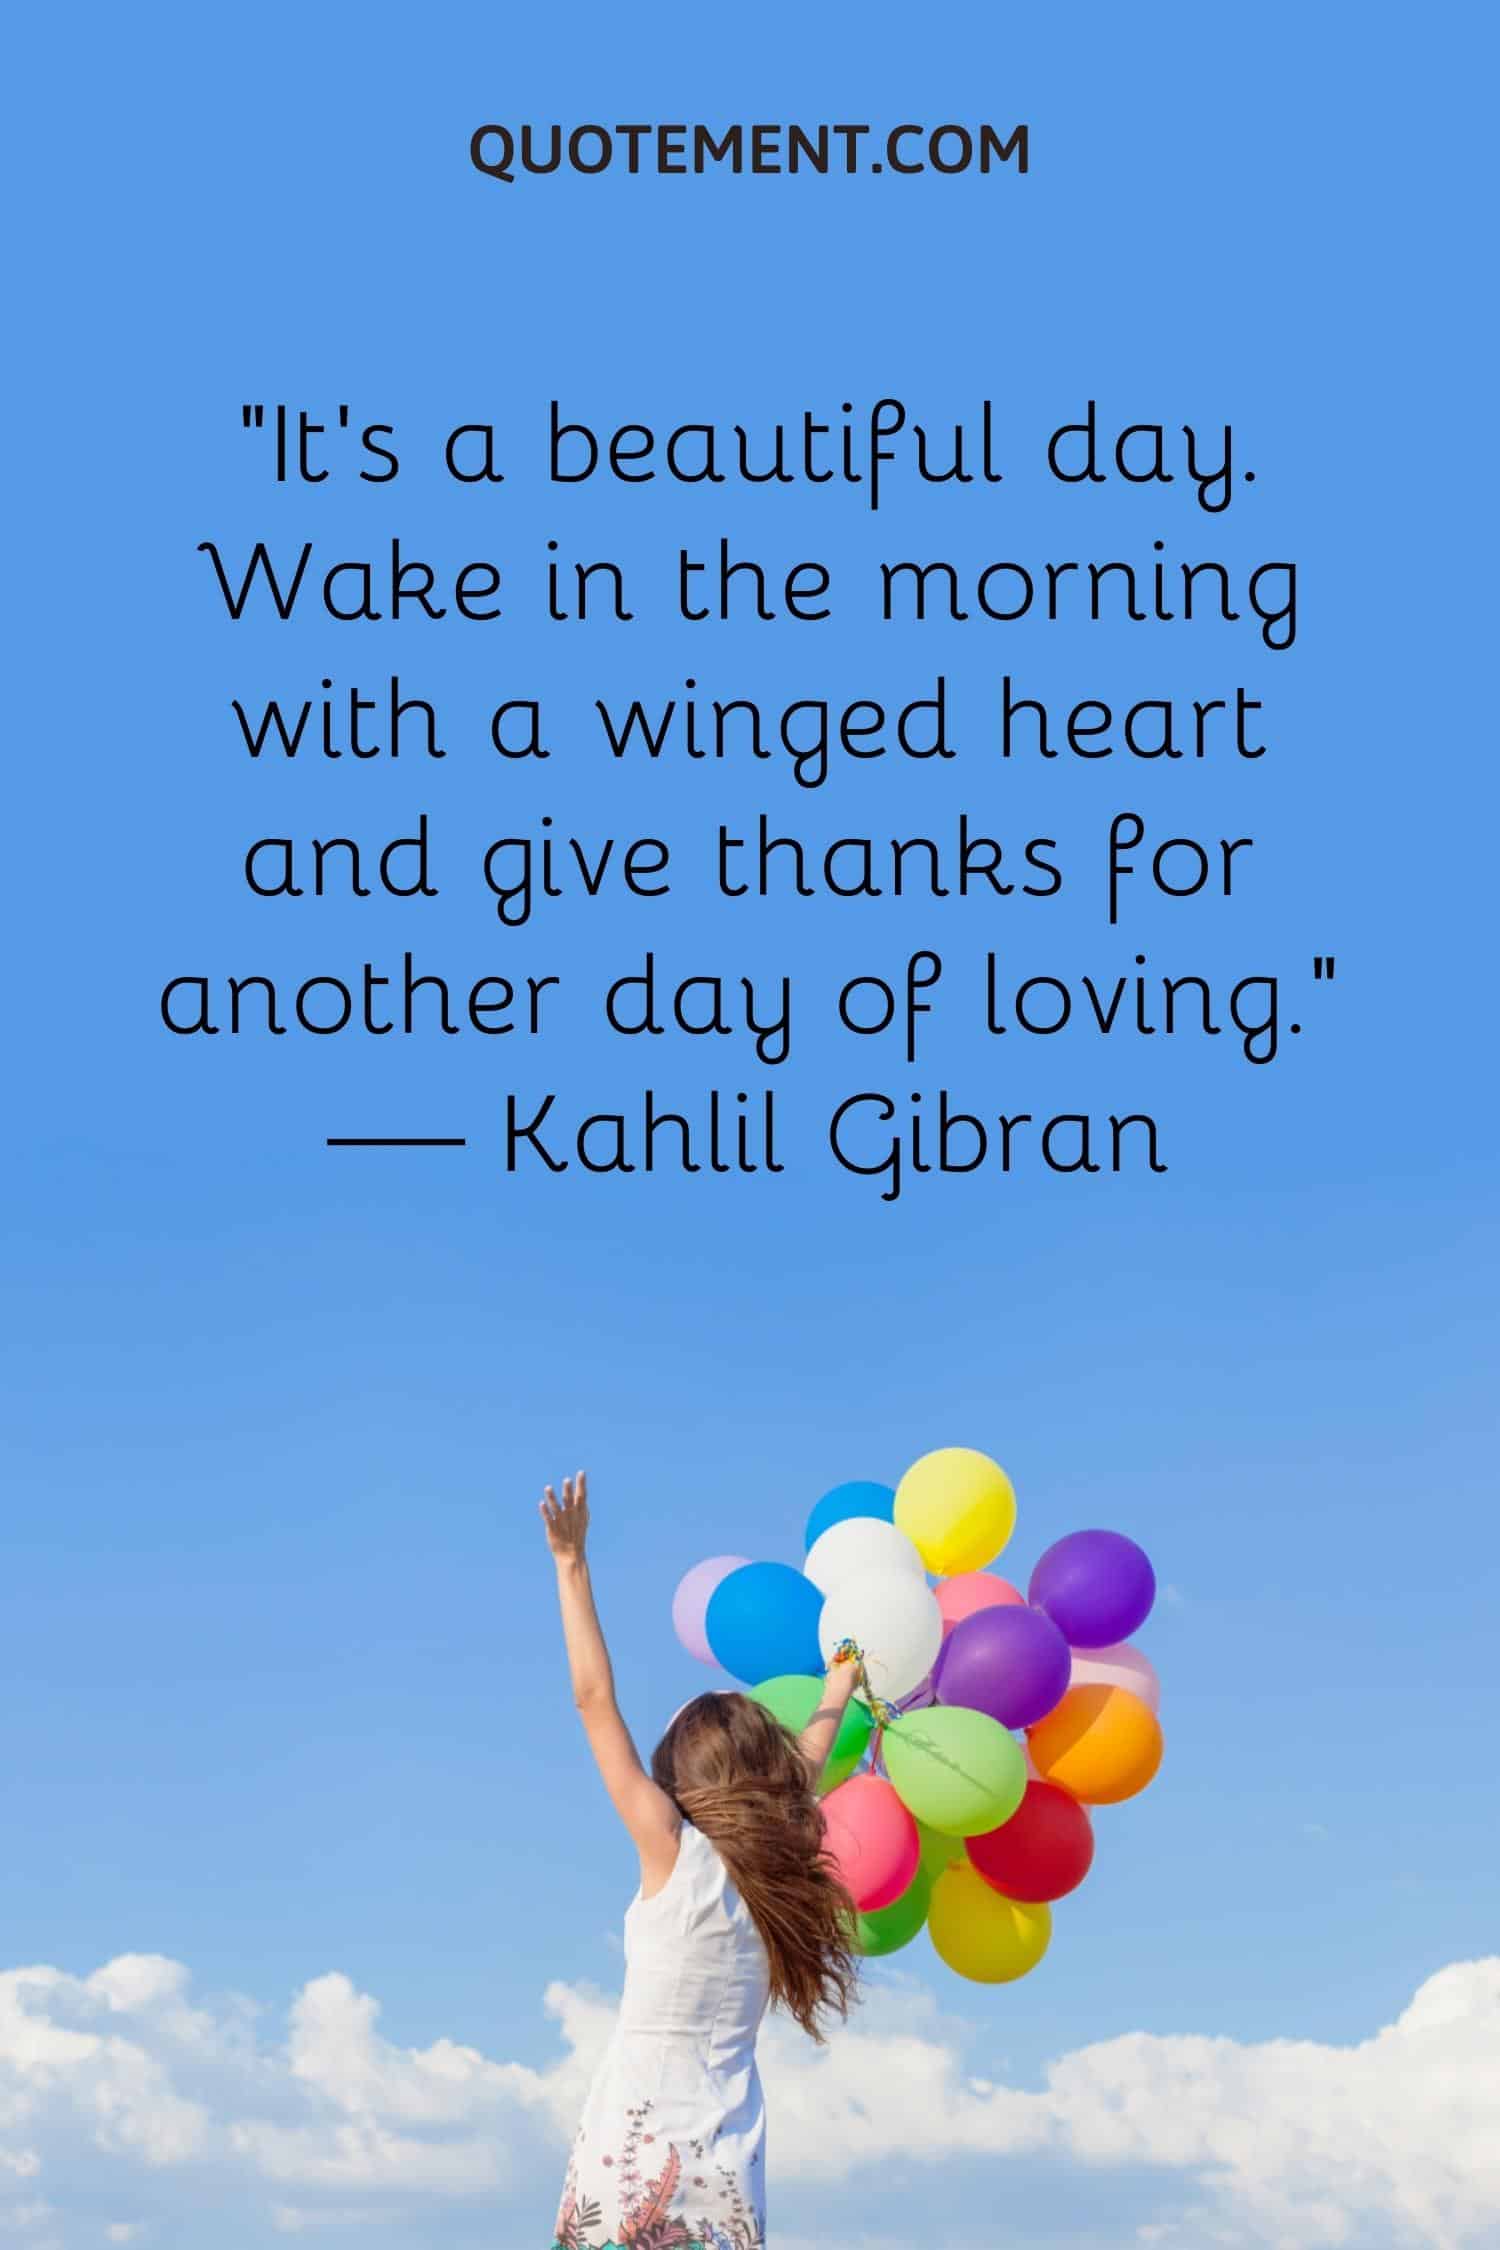 It’s a beautiful day. Wake in the morning with a winged heart and give thanks for another day of loving